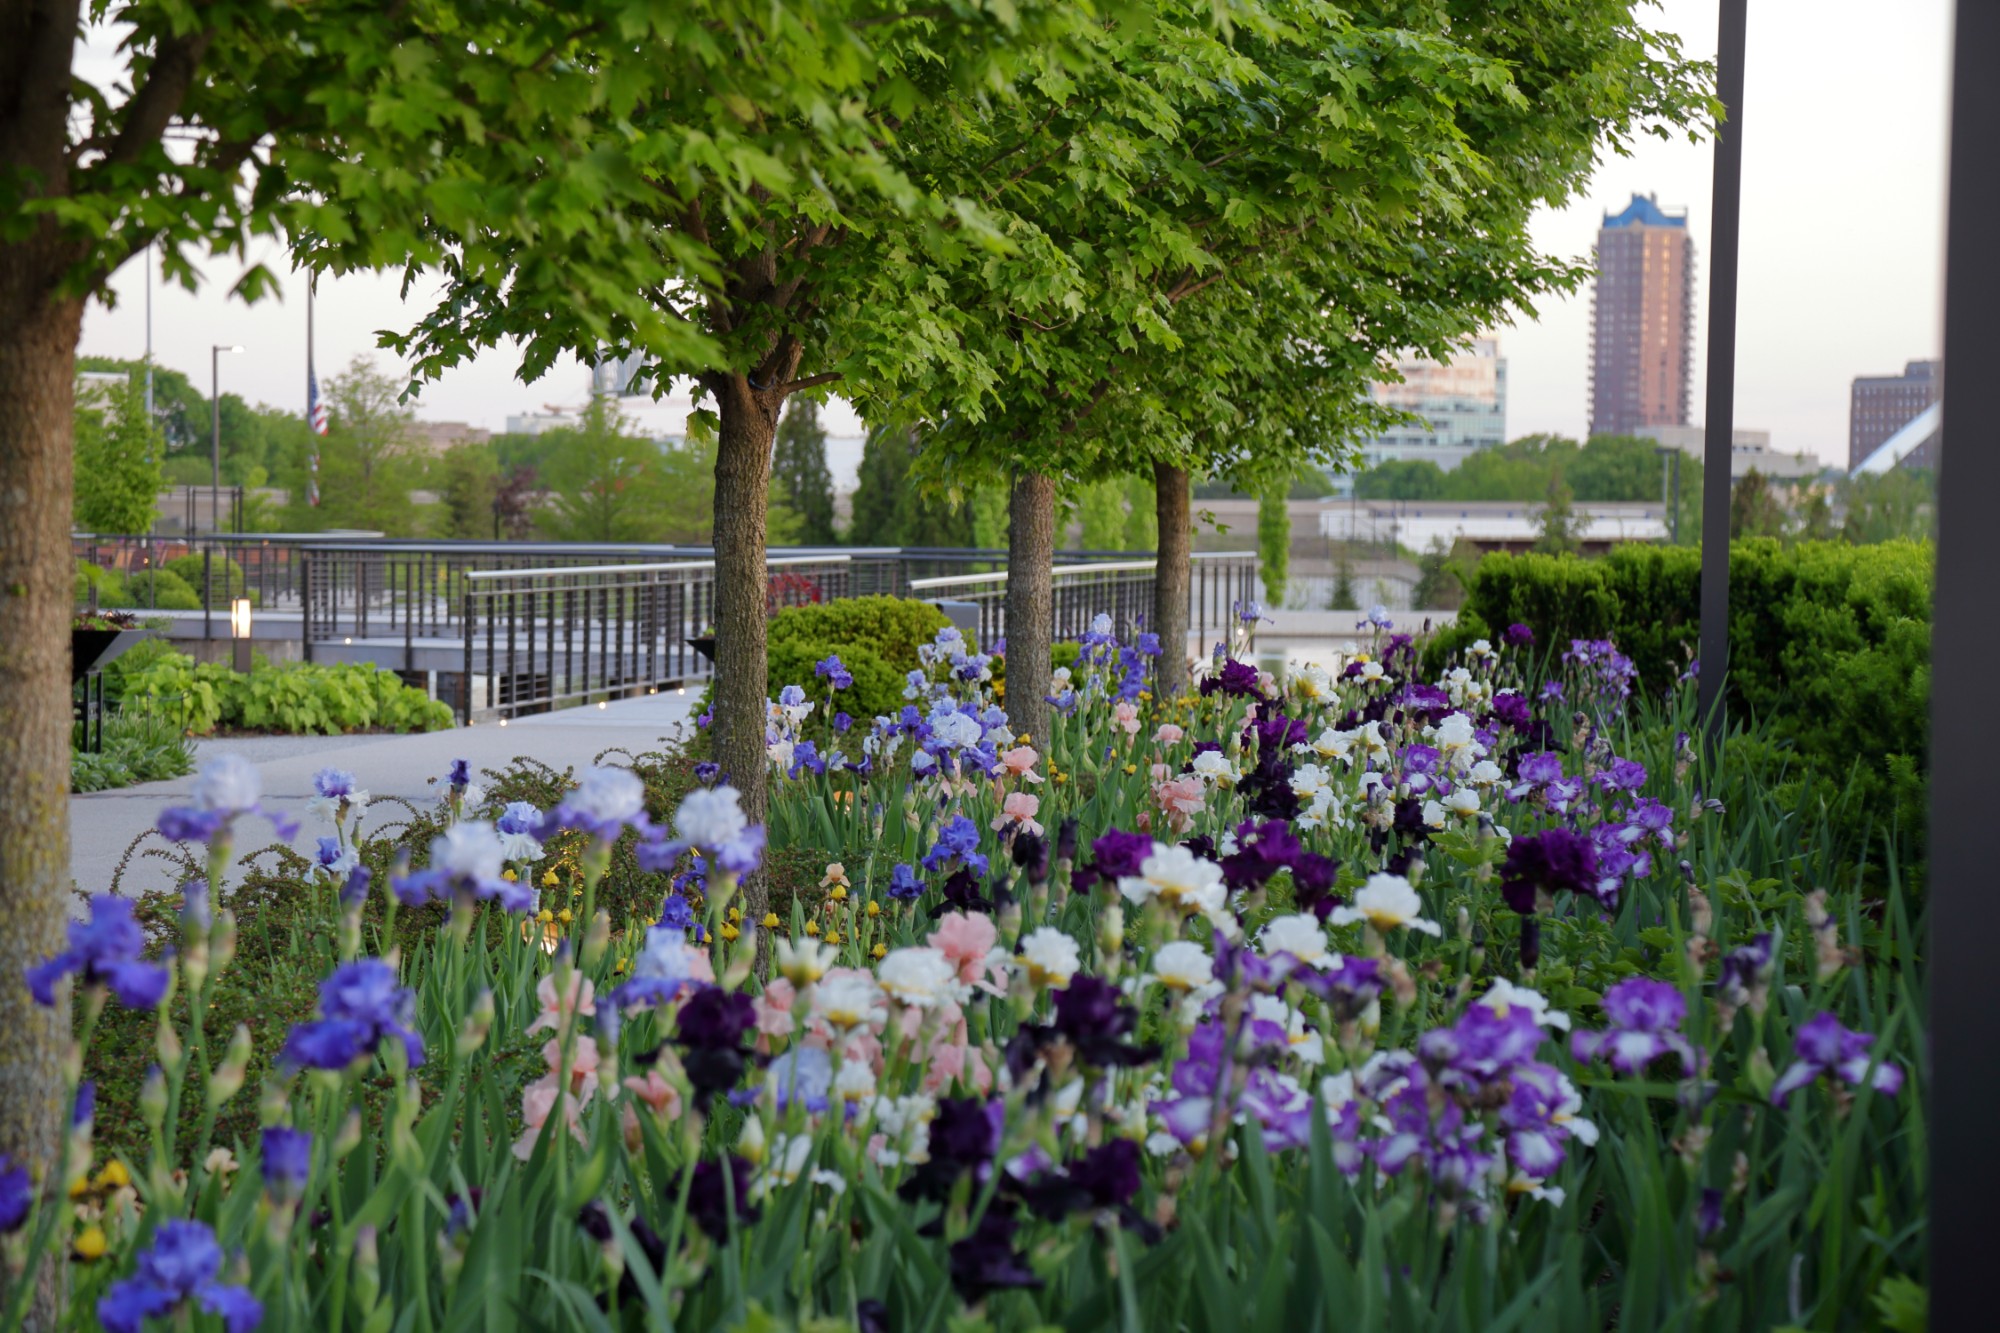 Bearded irises along the Ruan Allee. Photo by Kelly Norris.